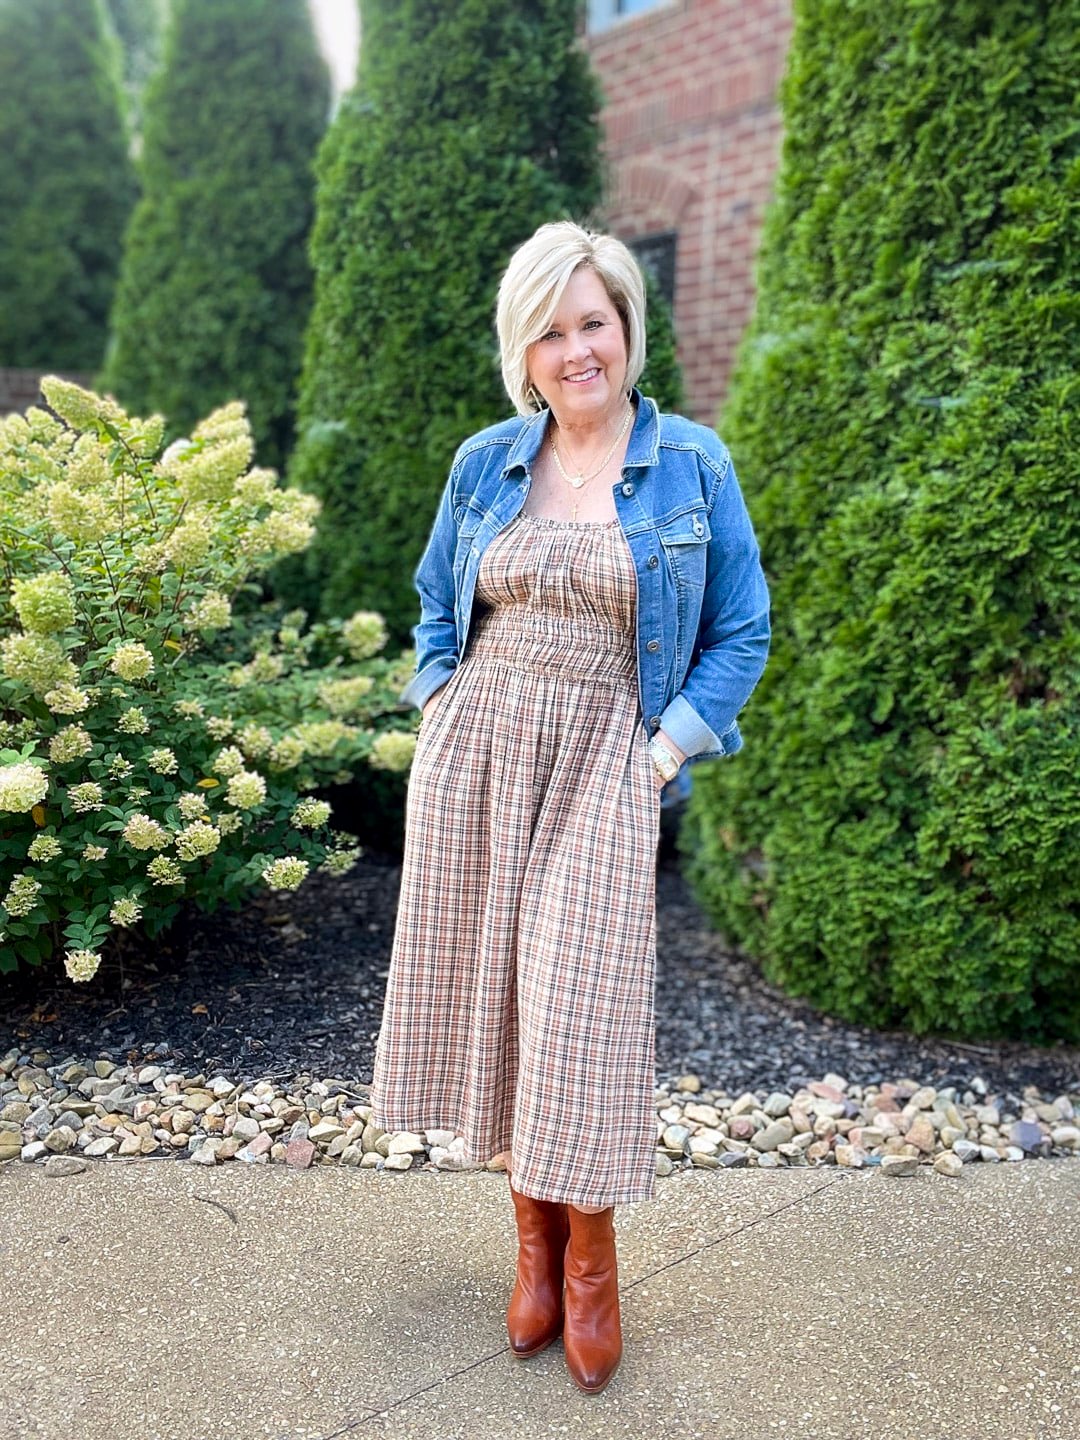 Over 40 Fashion Blogger, Tania Stephens is styling Old Navy Fall Dresses with western boots14